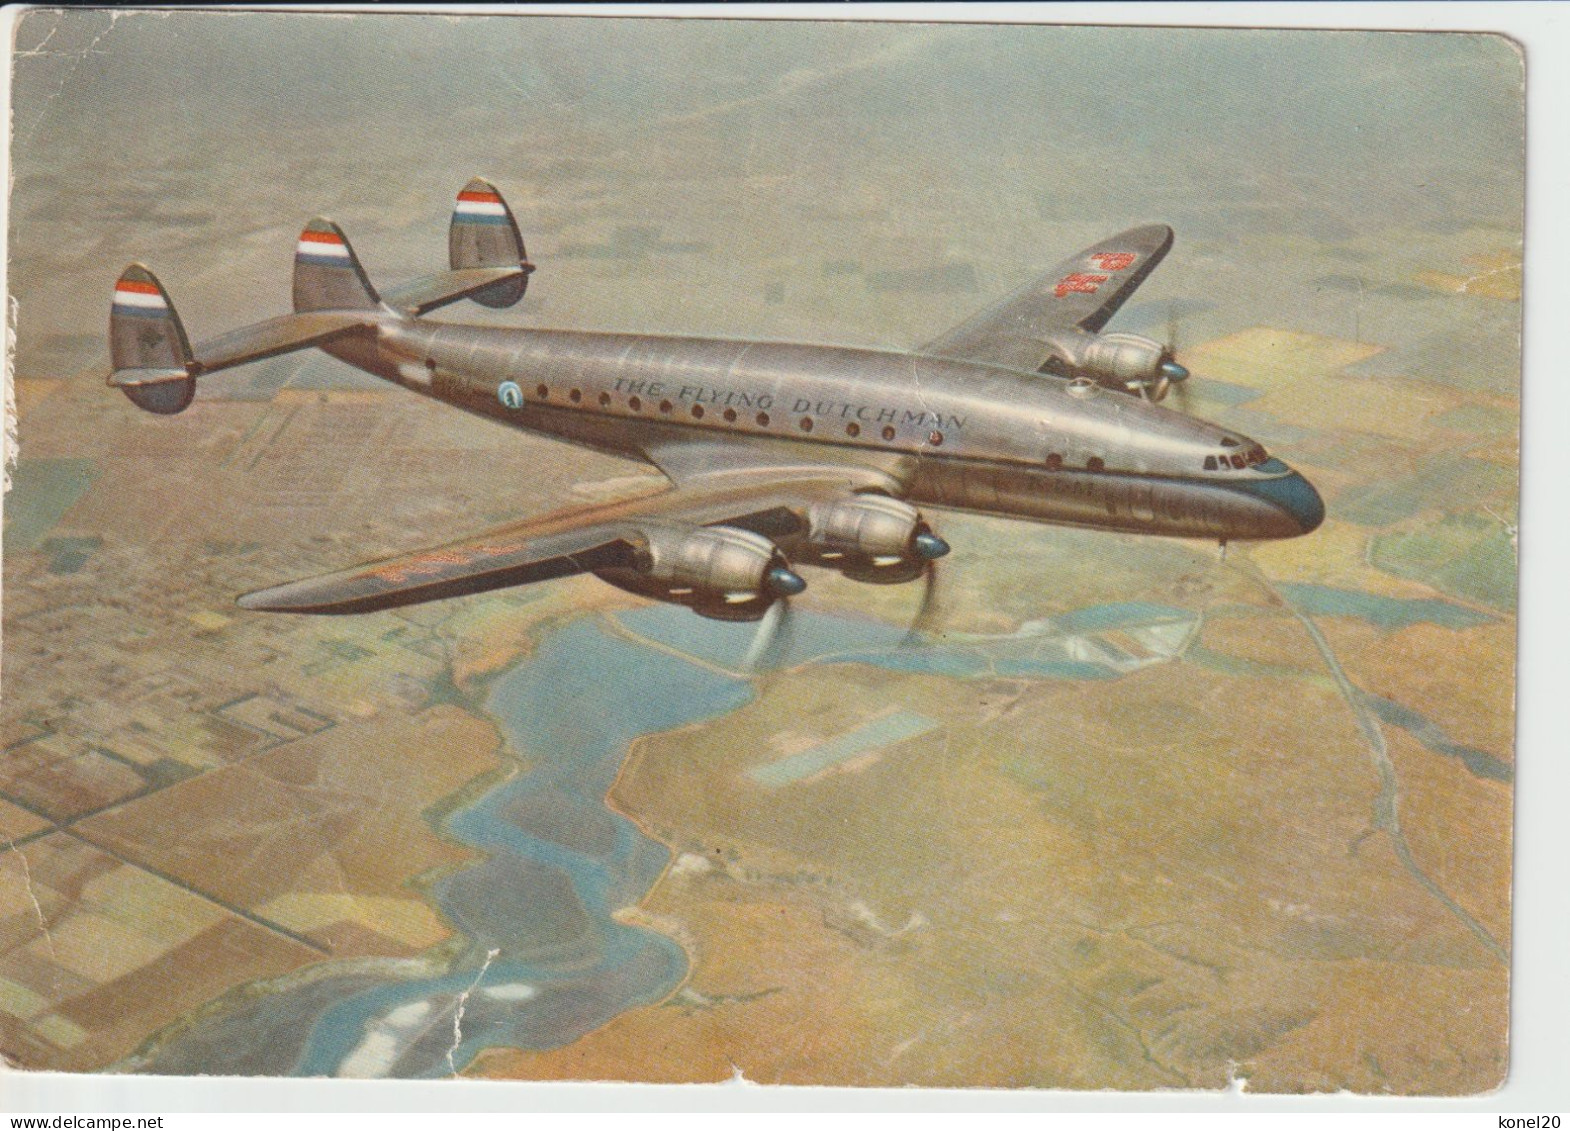 Vintage Pc KLM K.L.M Royal Dutch Airlines Issue Lockheed Constellation L-049 Aircraft - 1919-1938: Between Wars